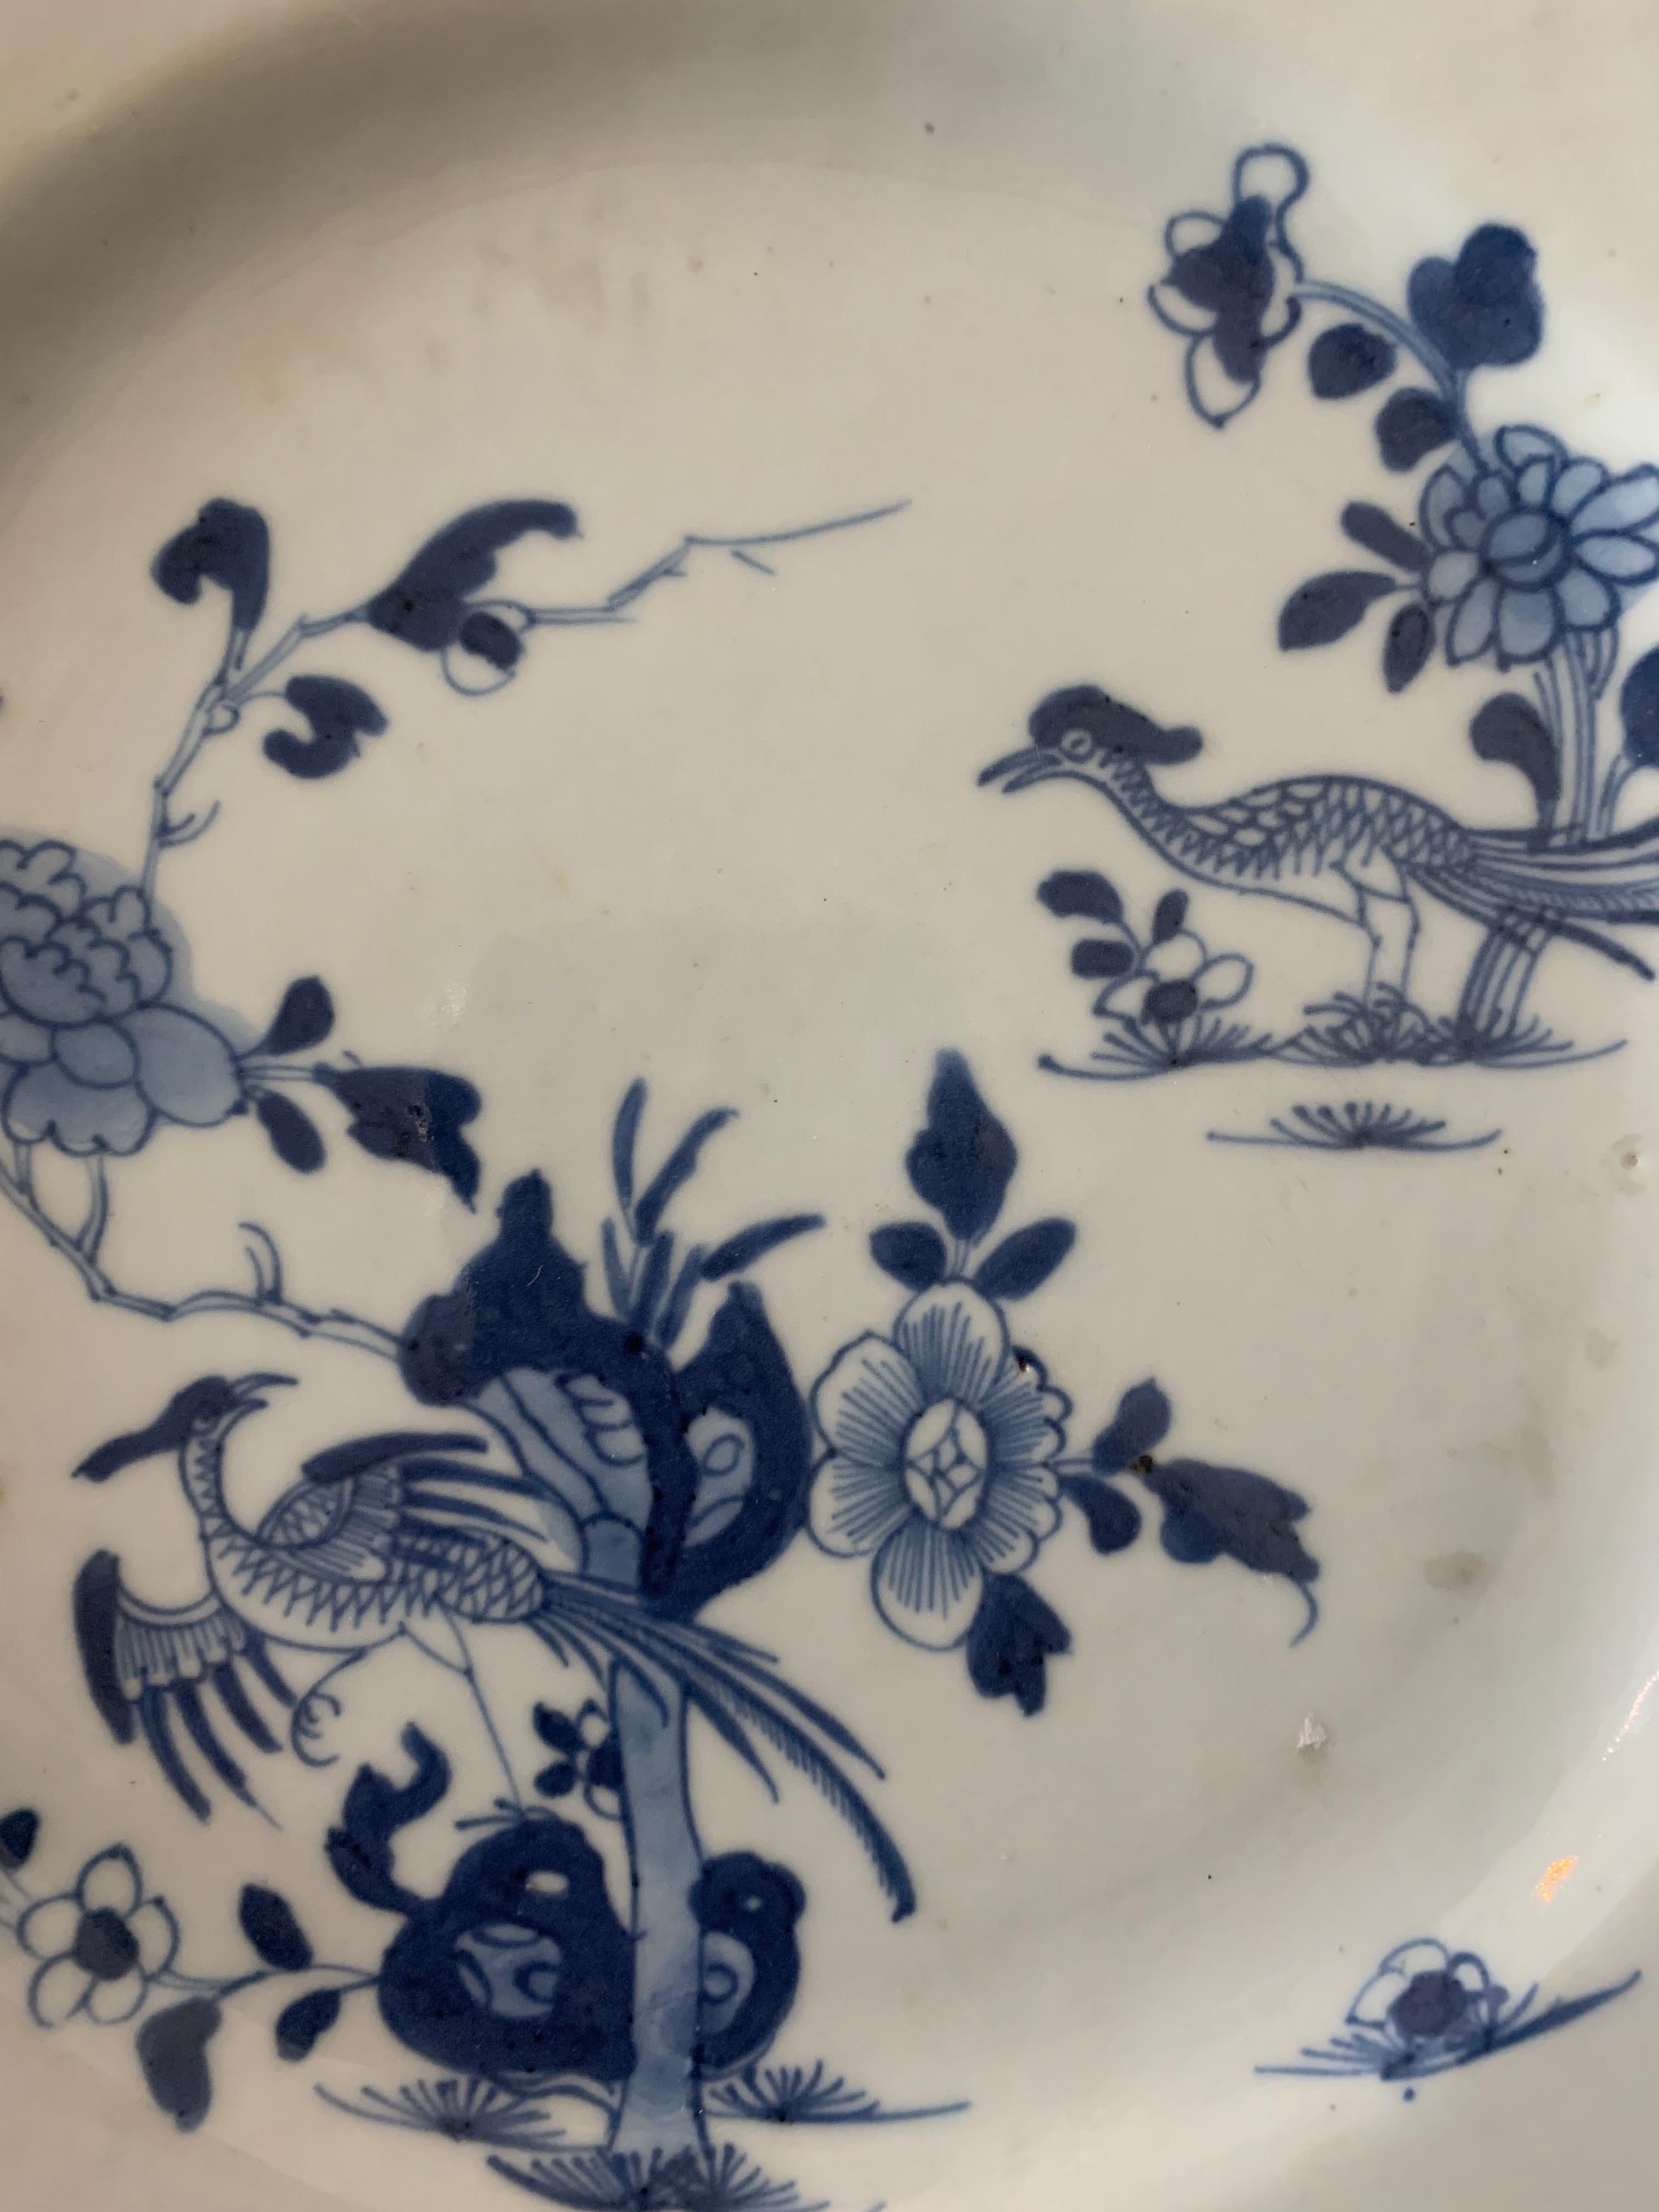 Nice « Blanc Bleu » porcelain plate dating from XIX th century. Blue and white porcelain soup plate. White and blue plate with a couple of peacocks flying through plants and flowers. 

This porcelain is characteristic of the blue family. 
The